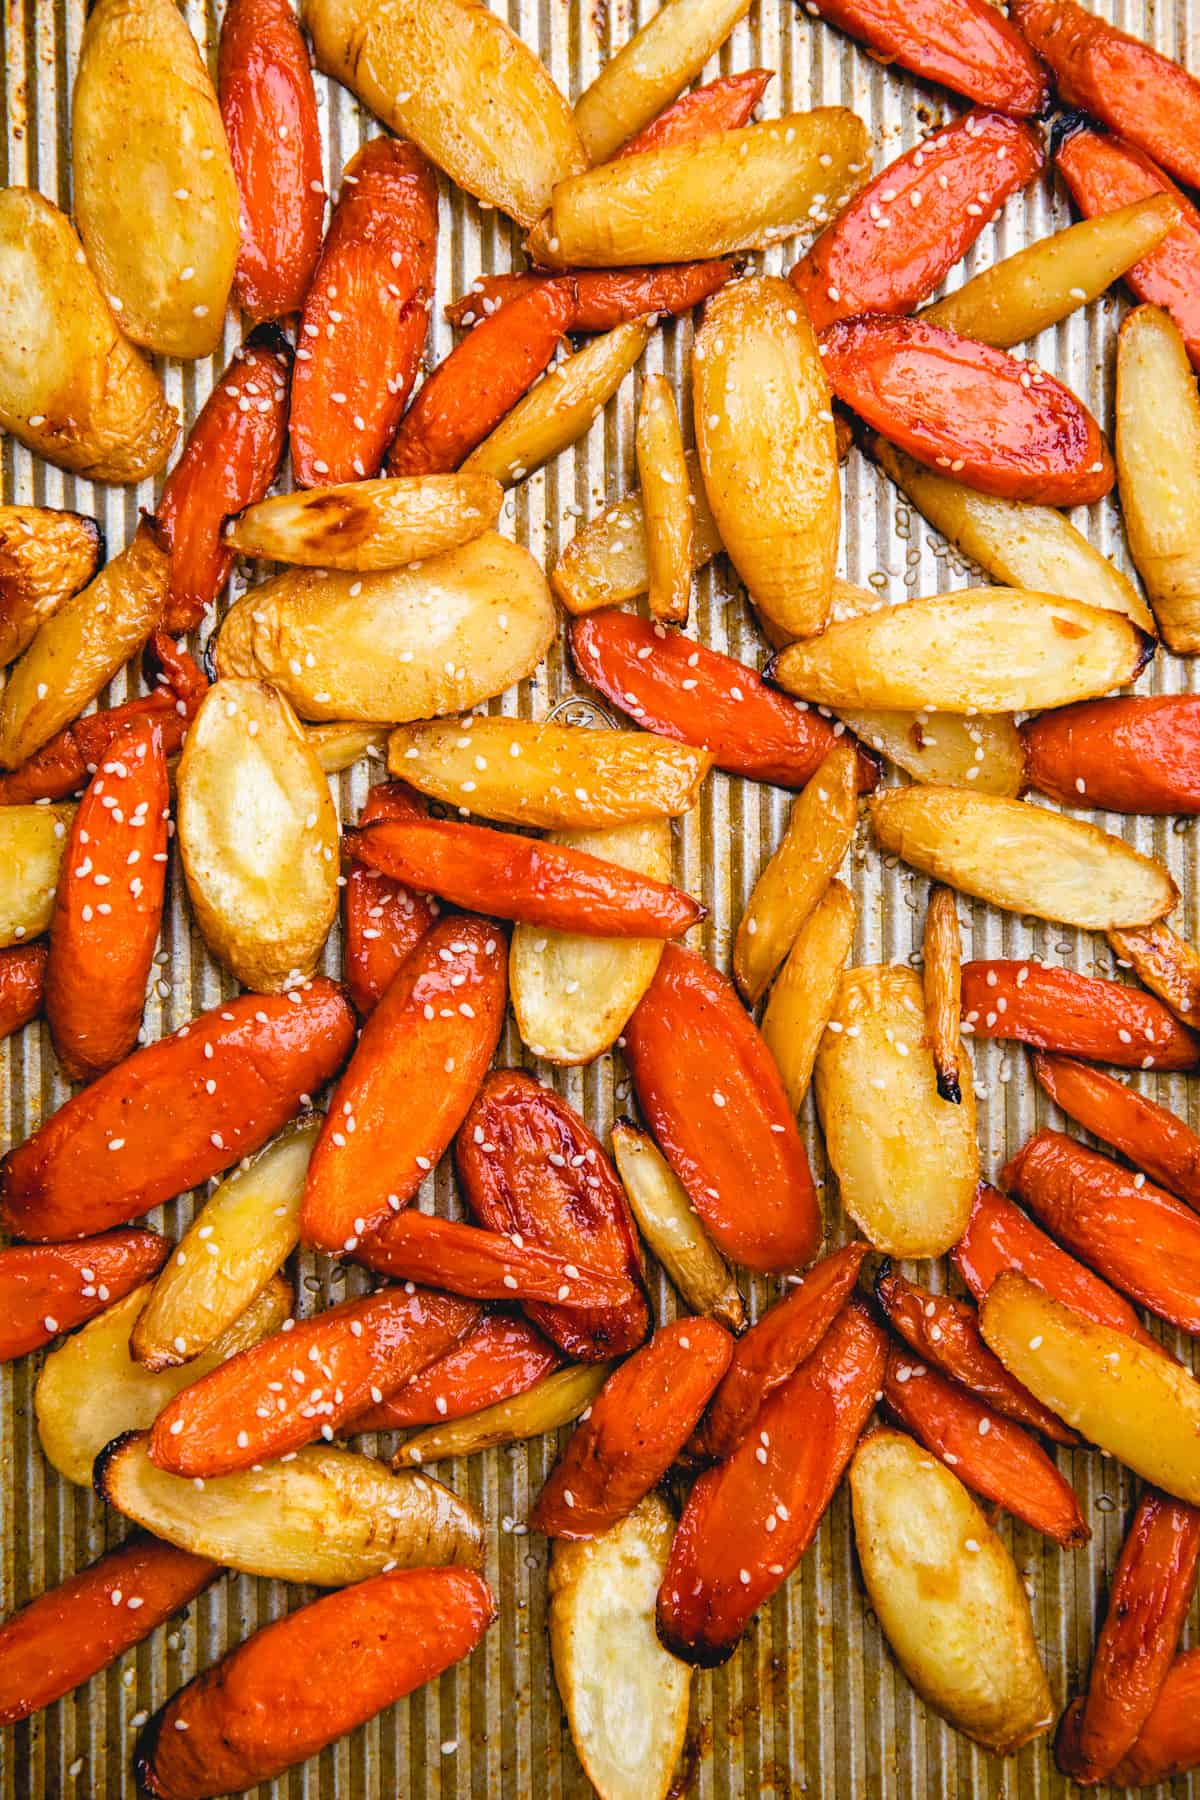 Baked carrots and parsnips on a baking sheet, topped with sesame seeds.